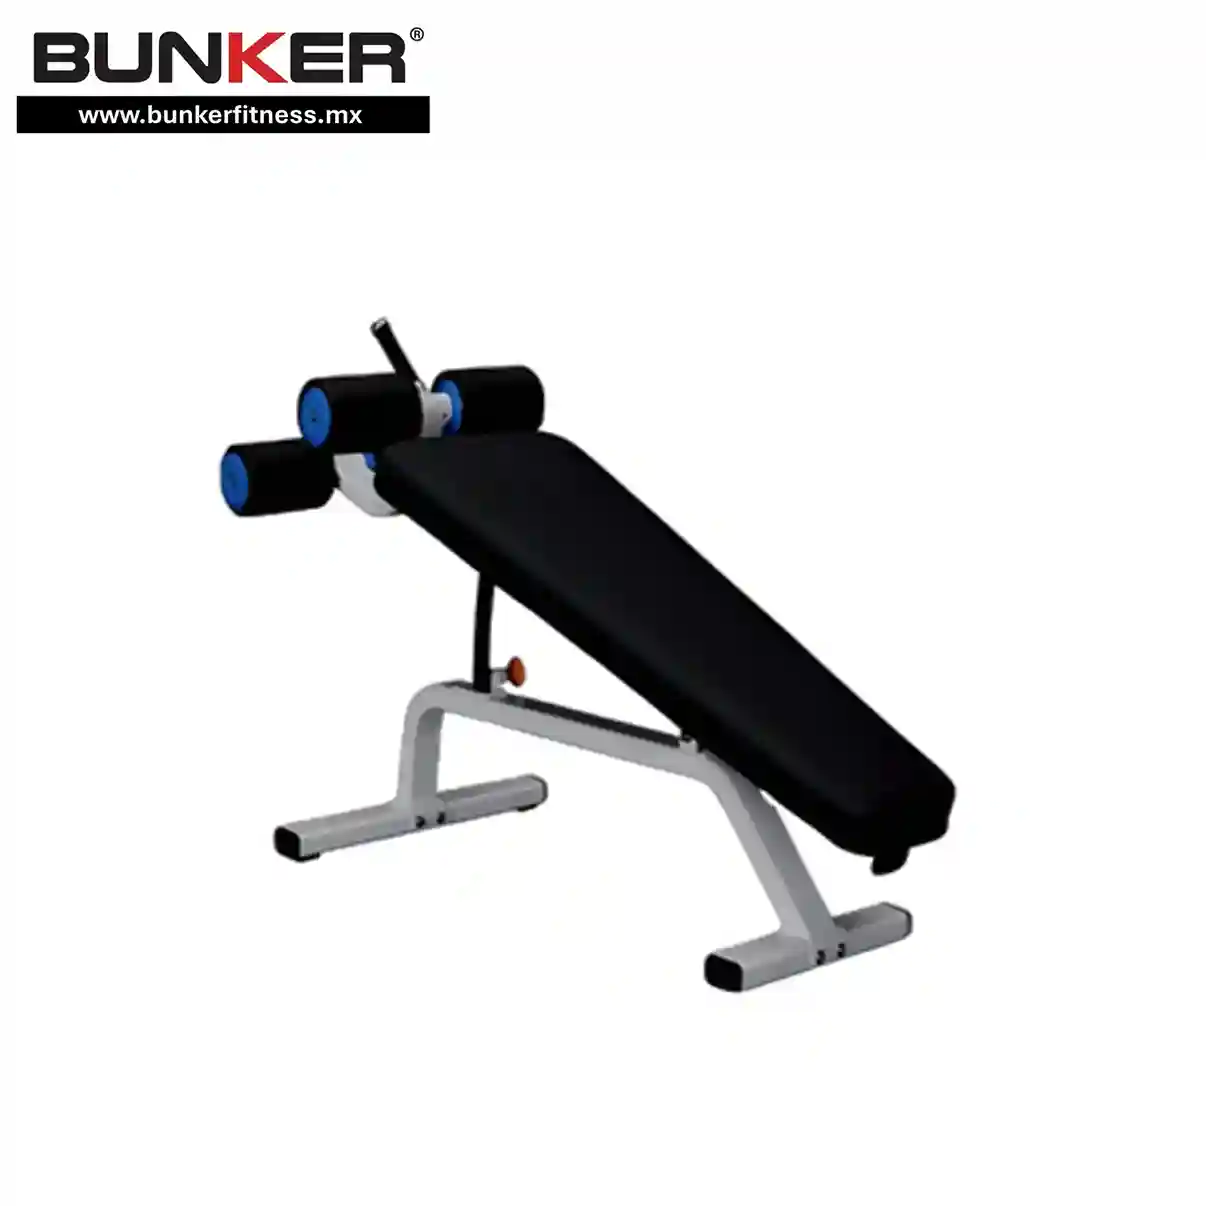 g8 abs curl bench bunker fitness para ejercicio y gimnasio en casa gym bunker gym bunker fitness